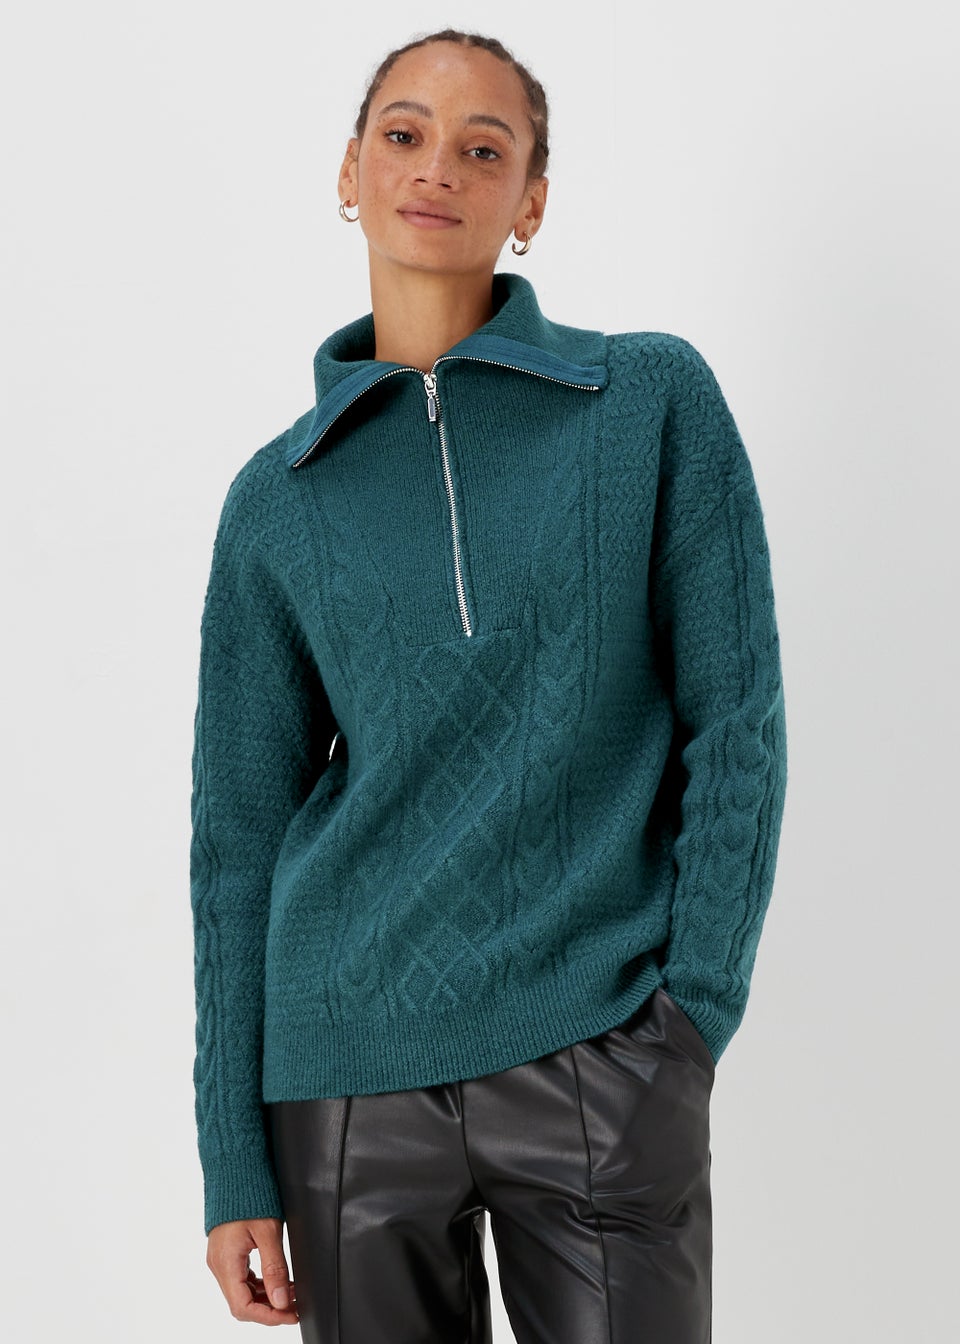 Teal Zip Neck Cable Knit Jumper